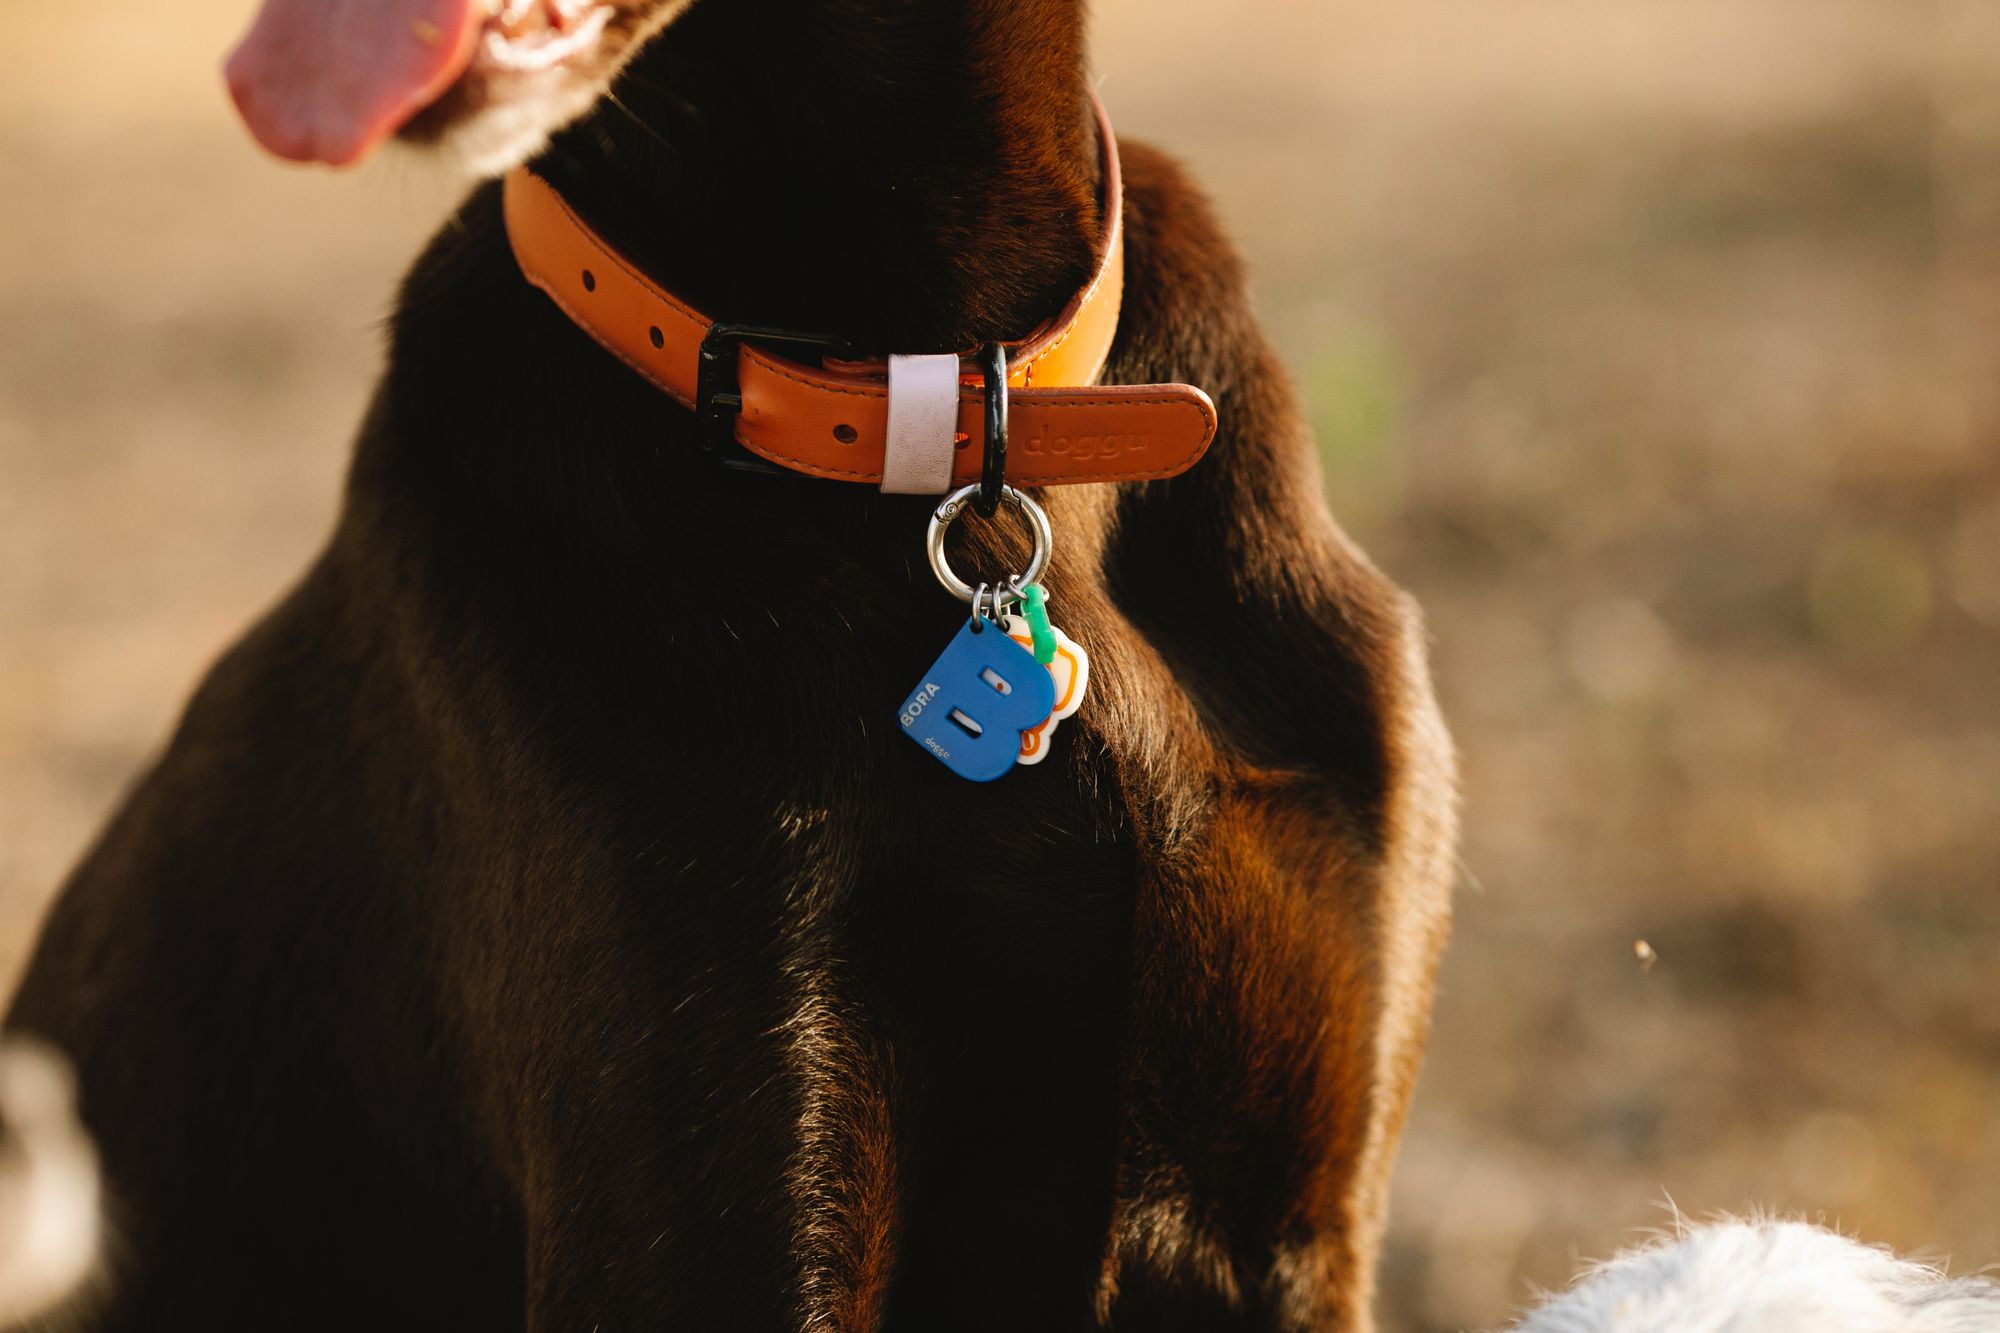 how to attach a dog tag to a collar